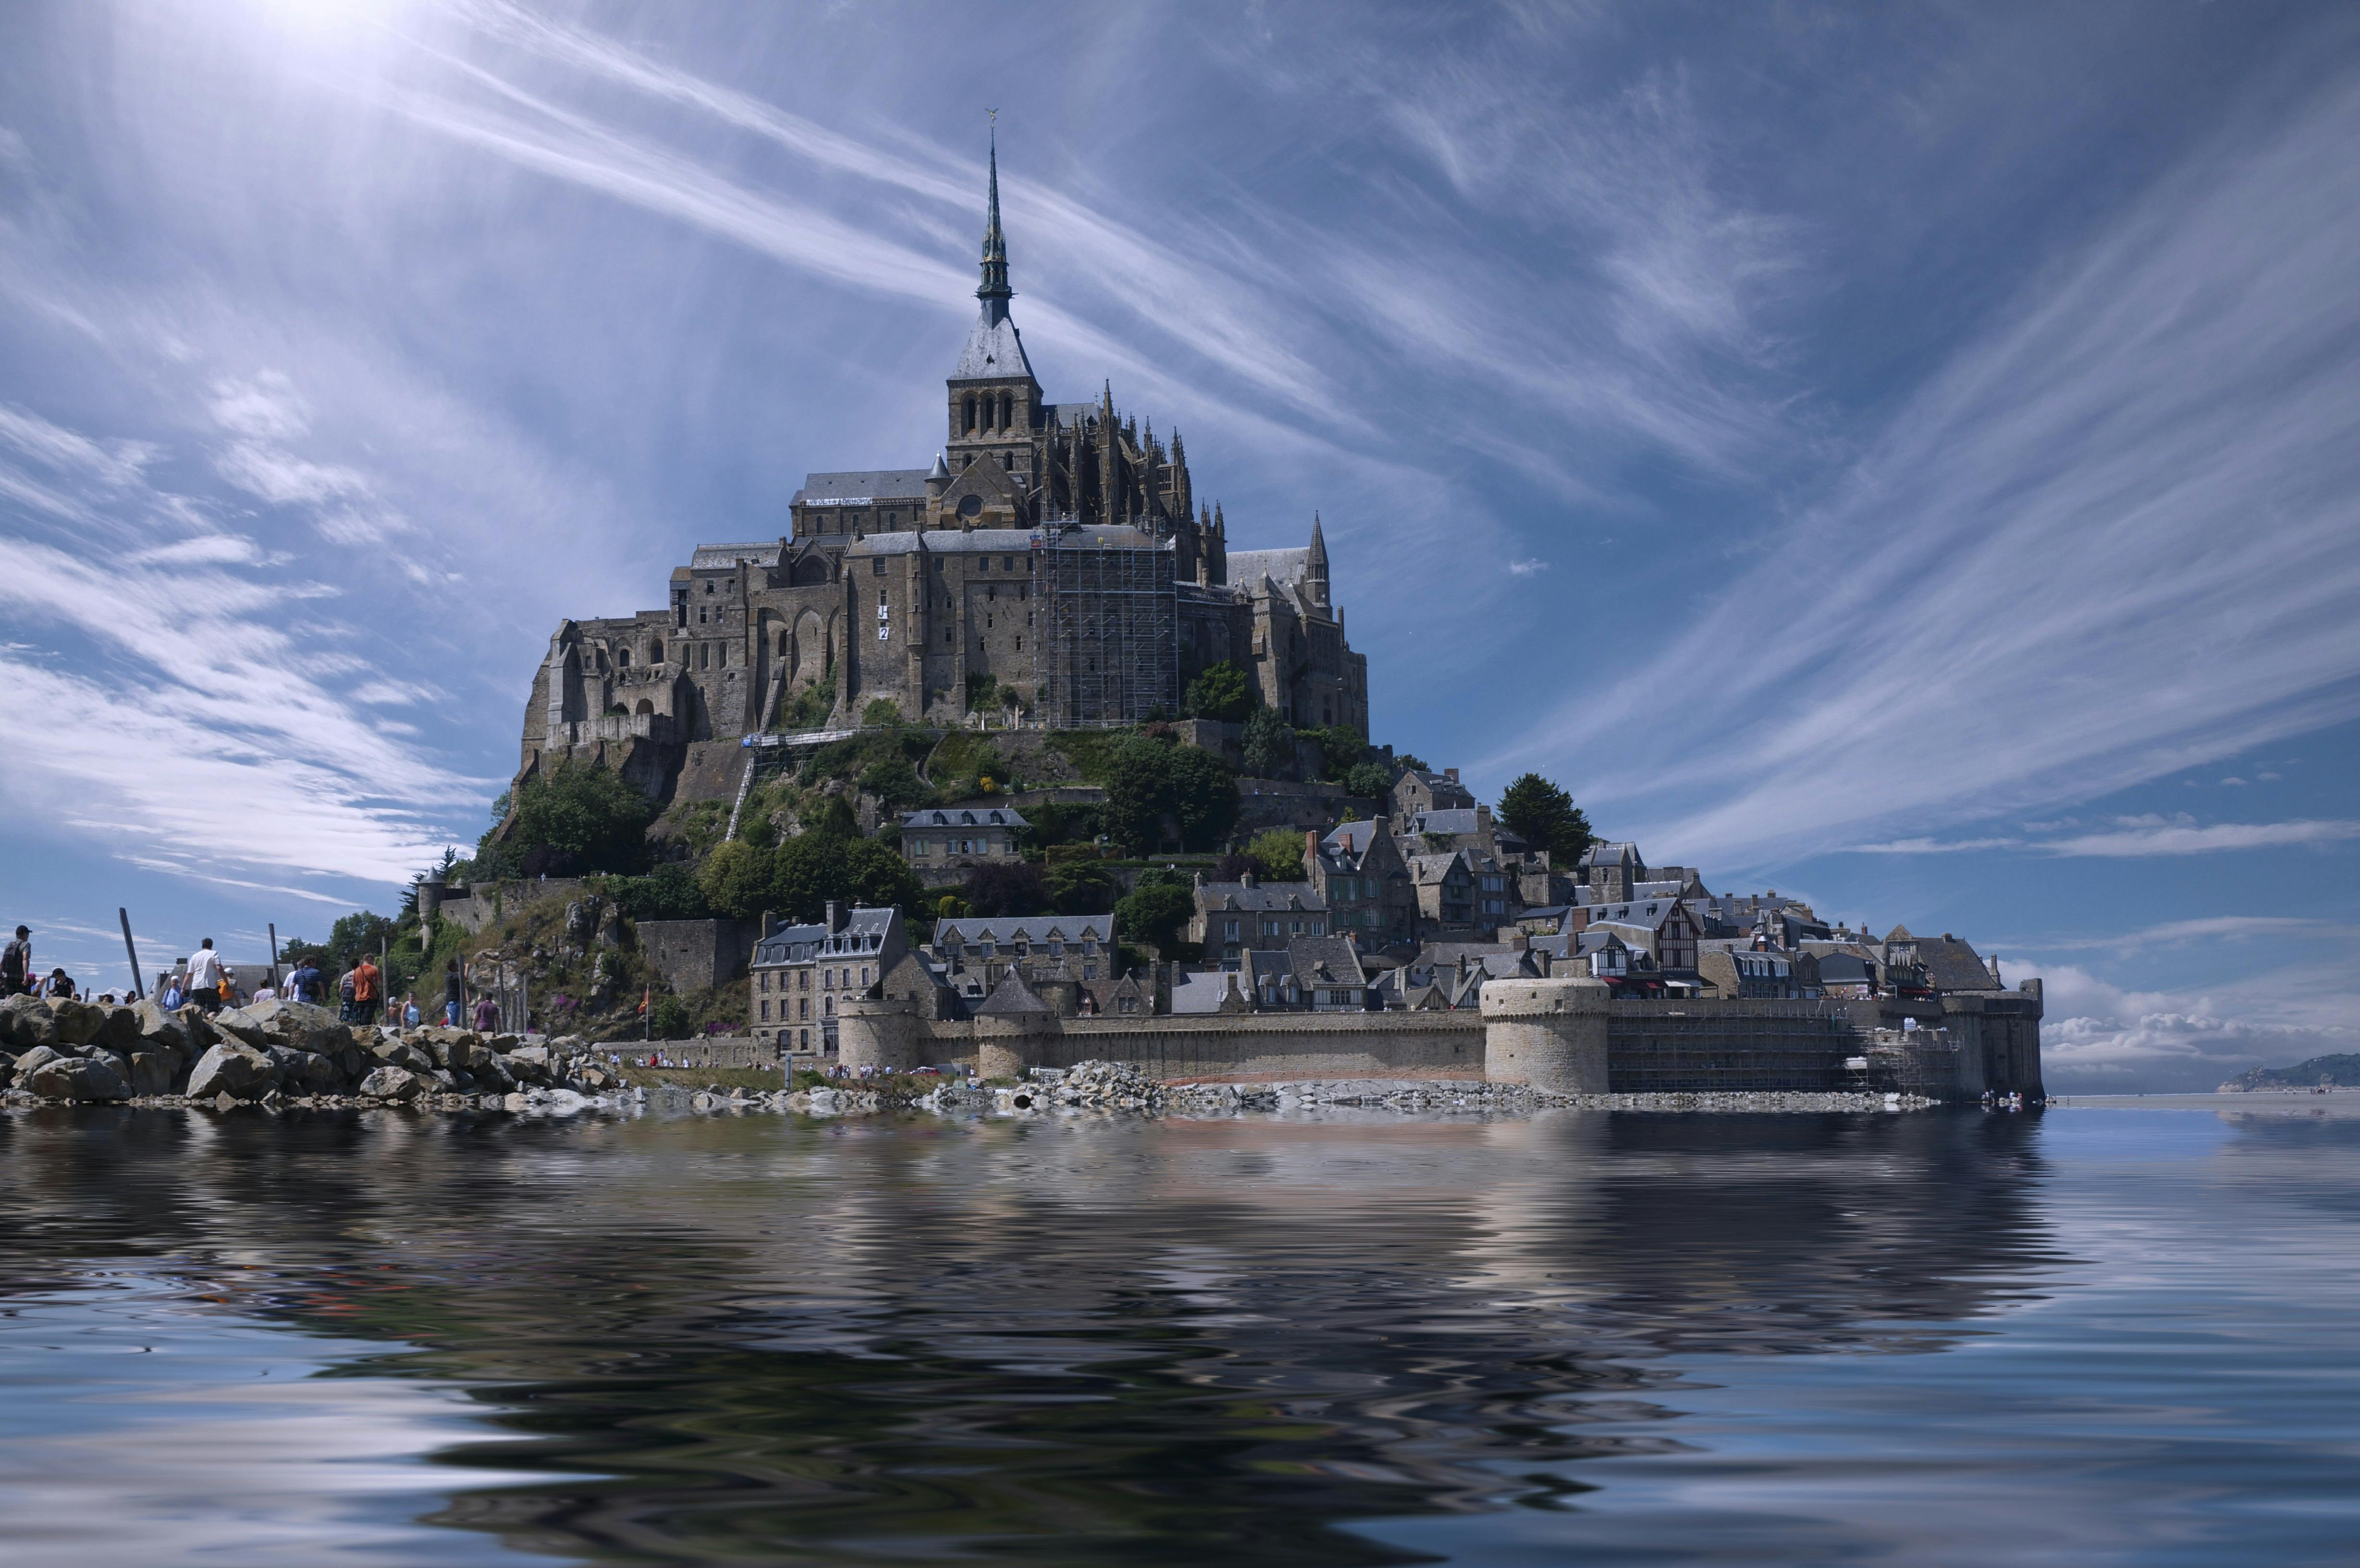 The island of Mont-Saint-Michel off the coast of western France